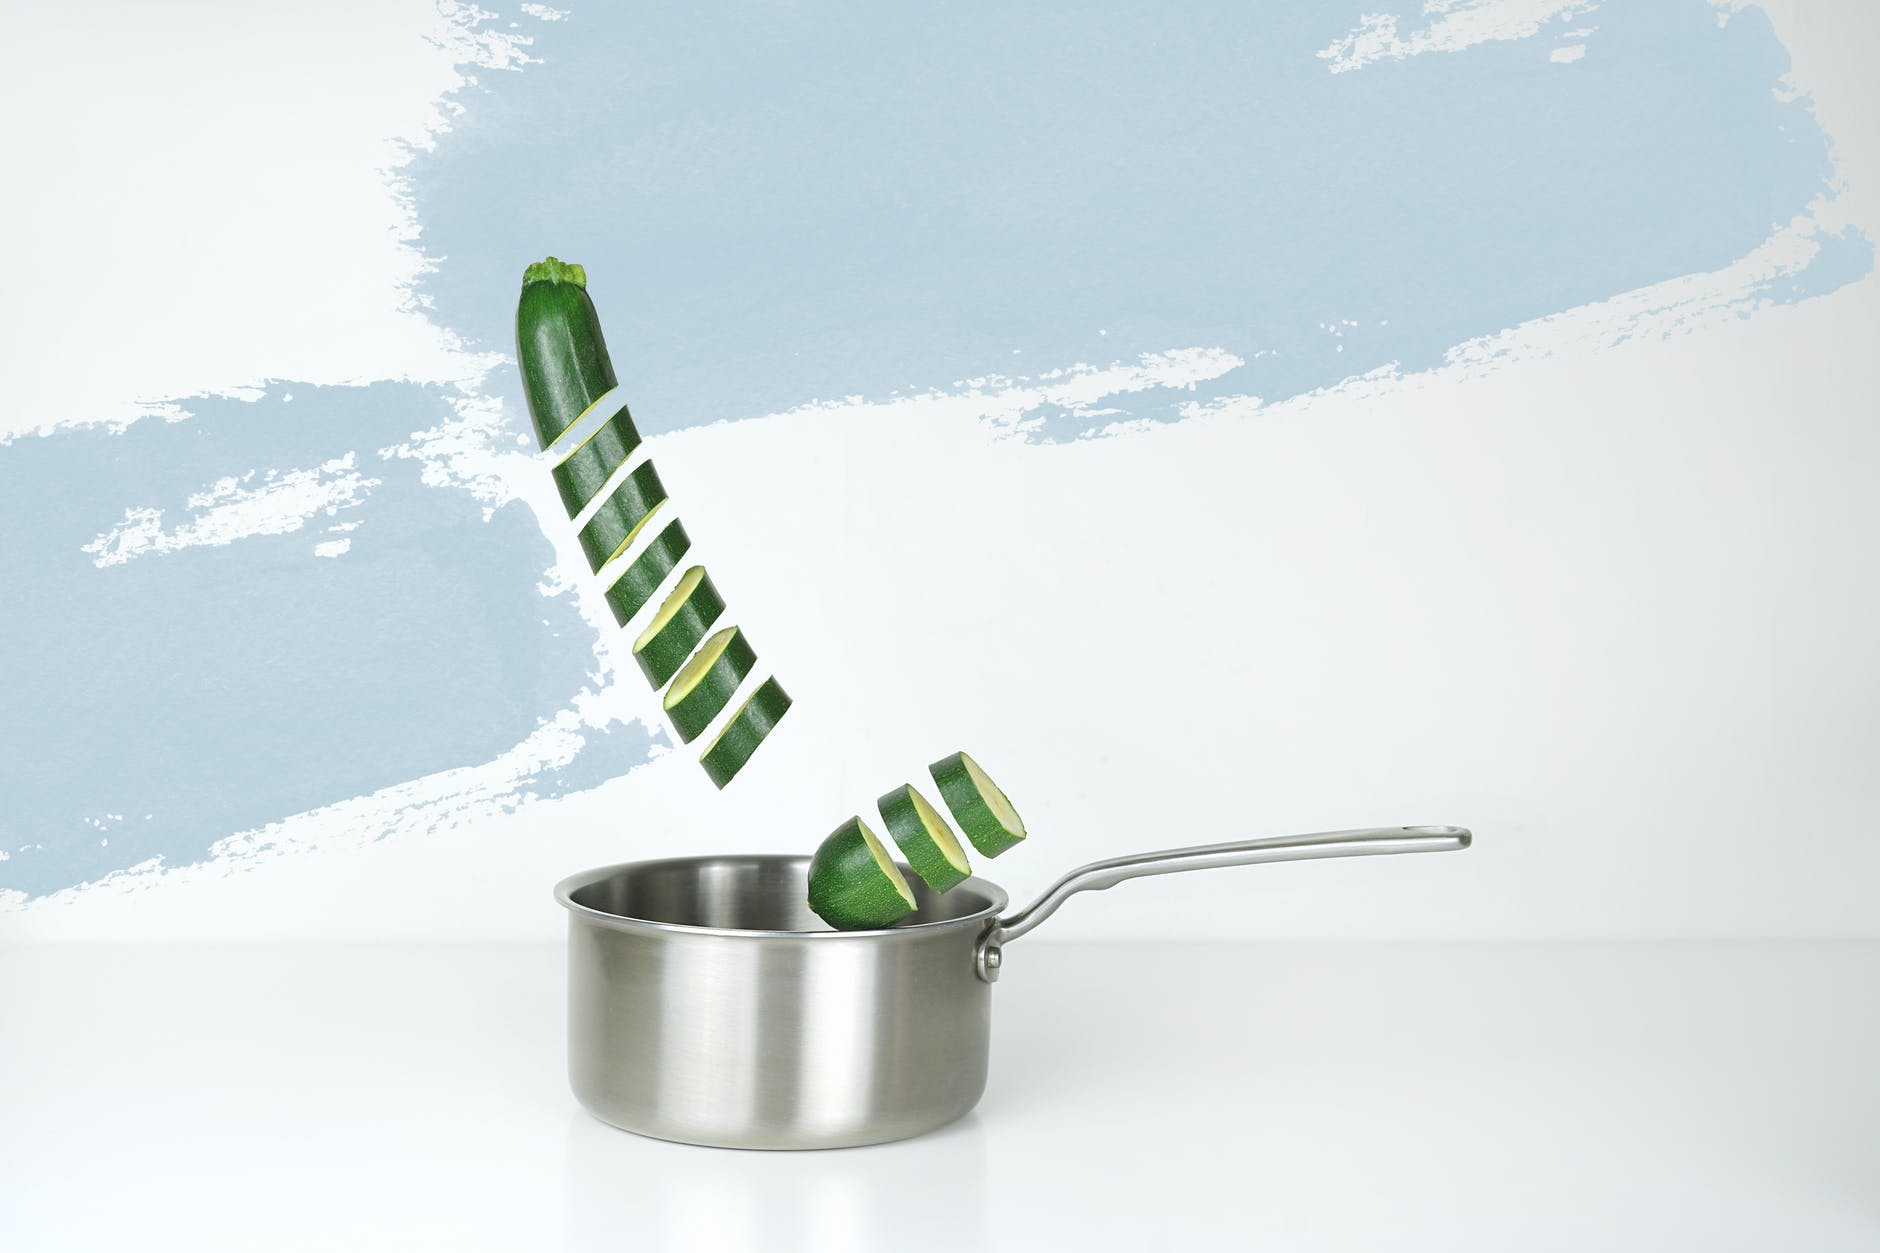 gray stainless steel sauce pan and green cucumber illustration